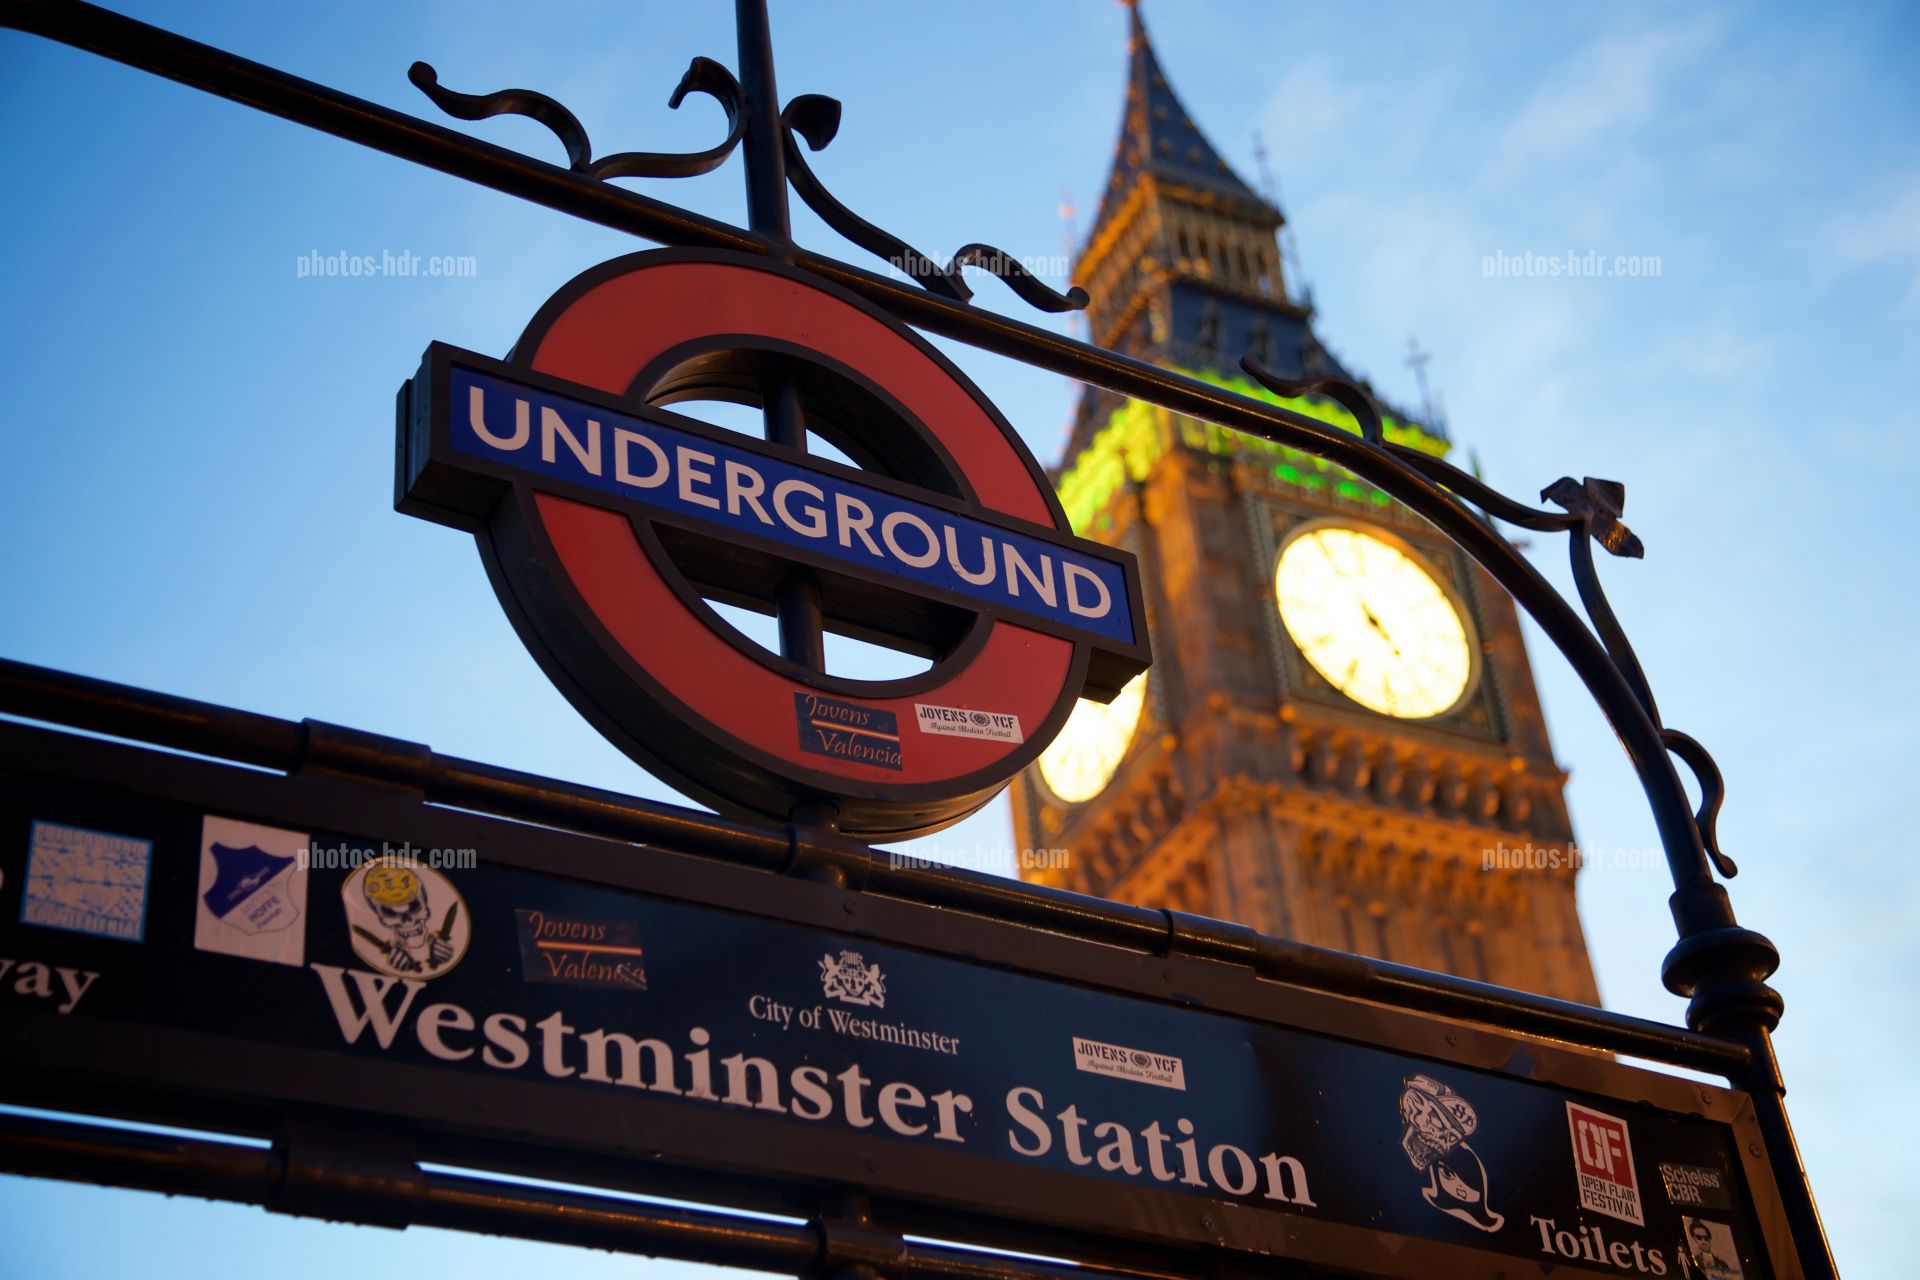 /The westminster station